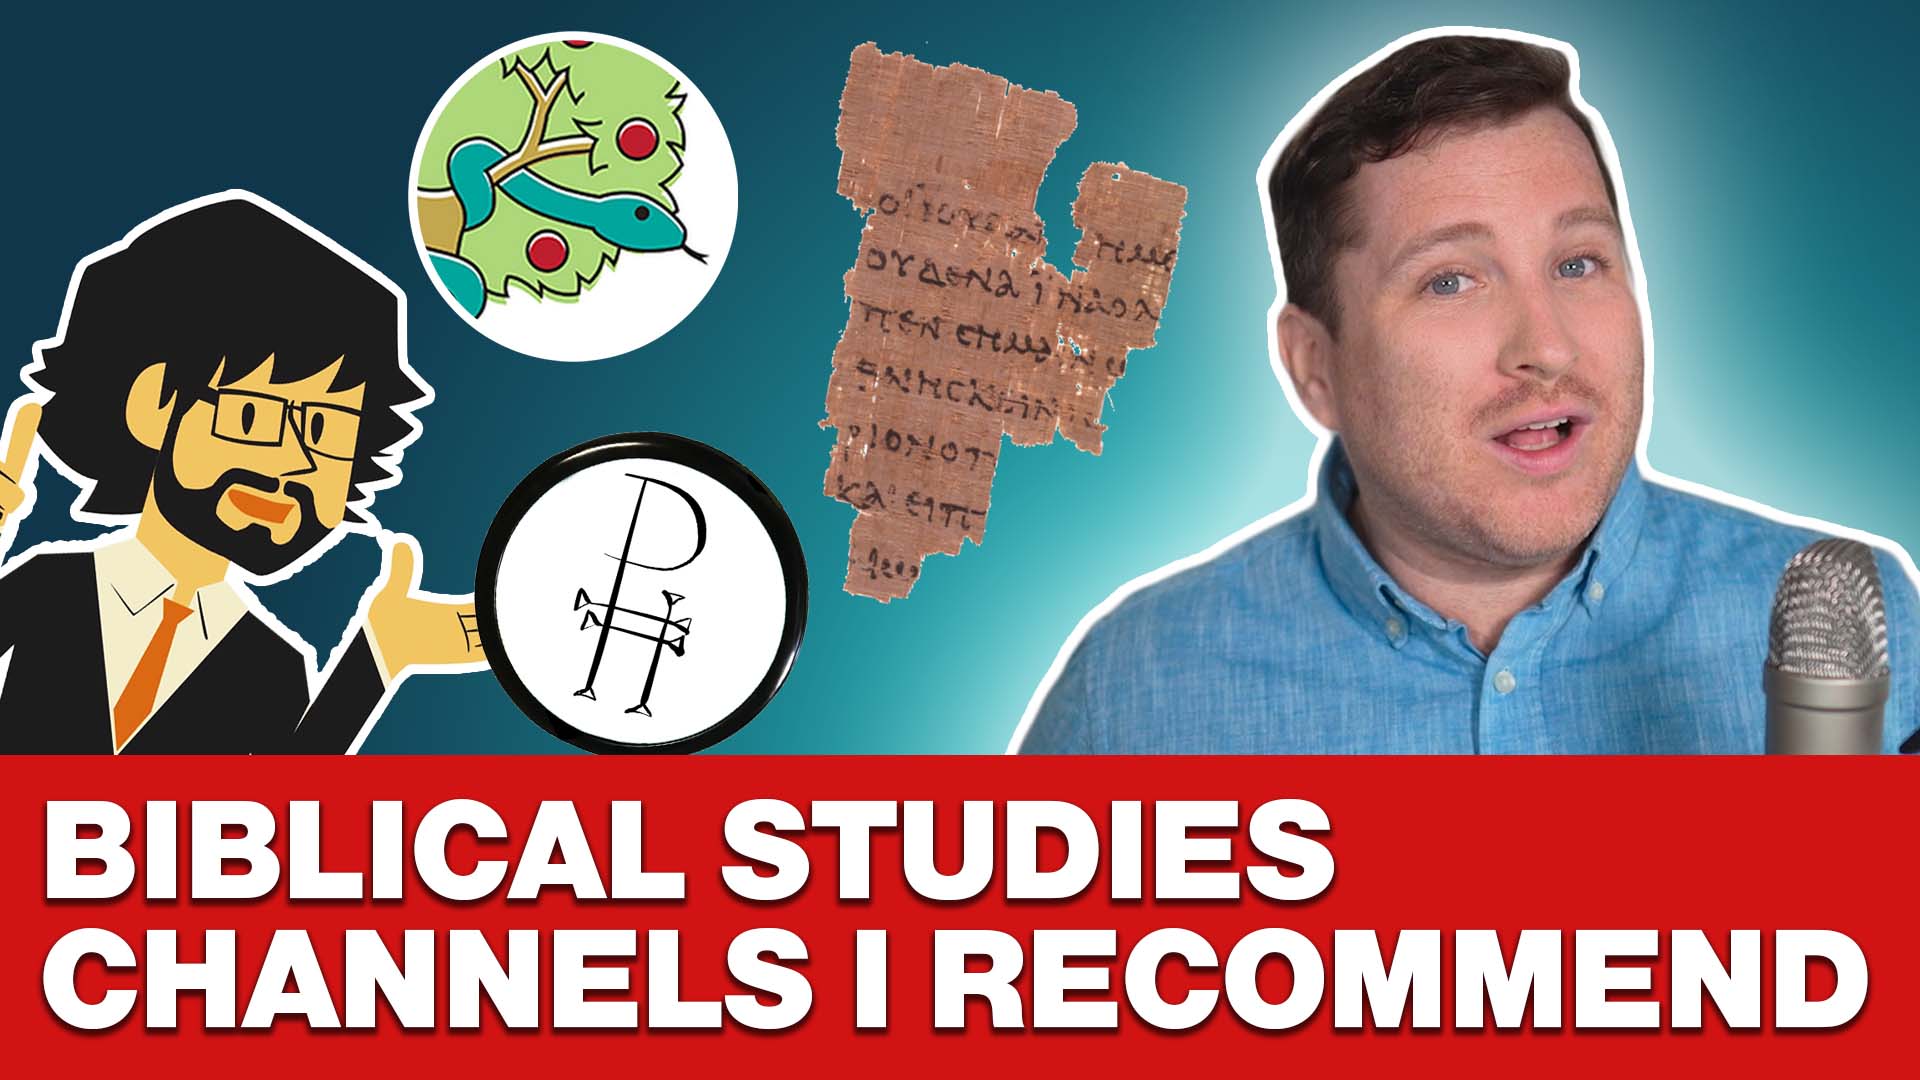 The Top Academic Biblical Studies YouTube Channels and Websites